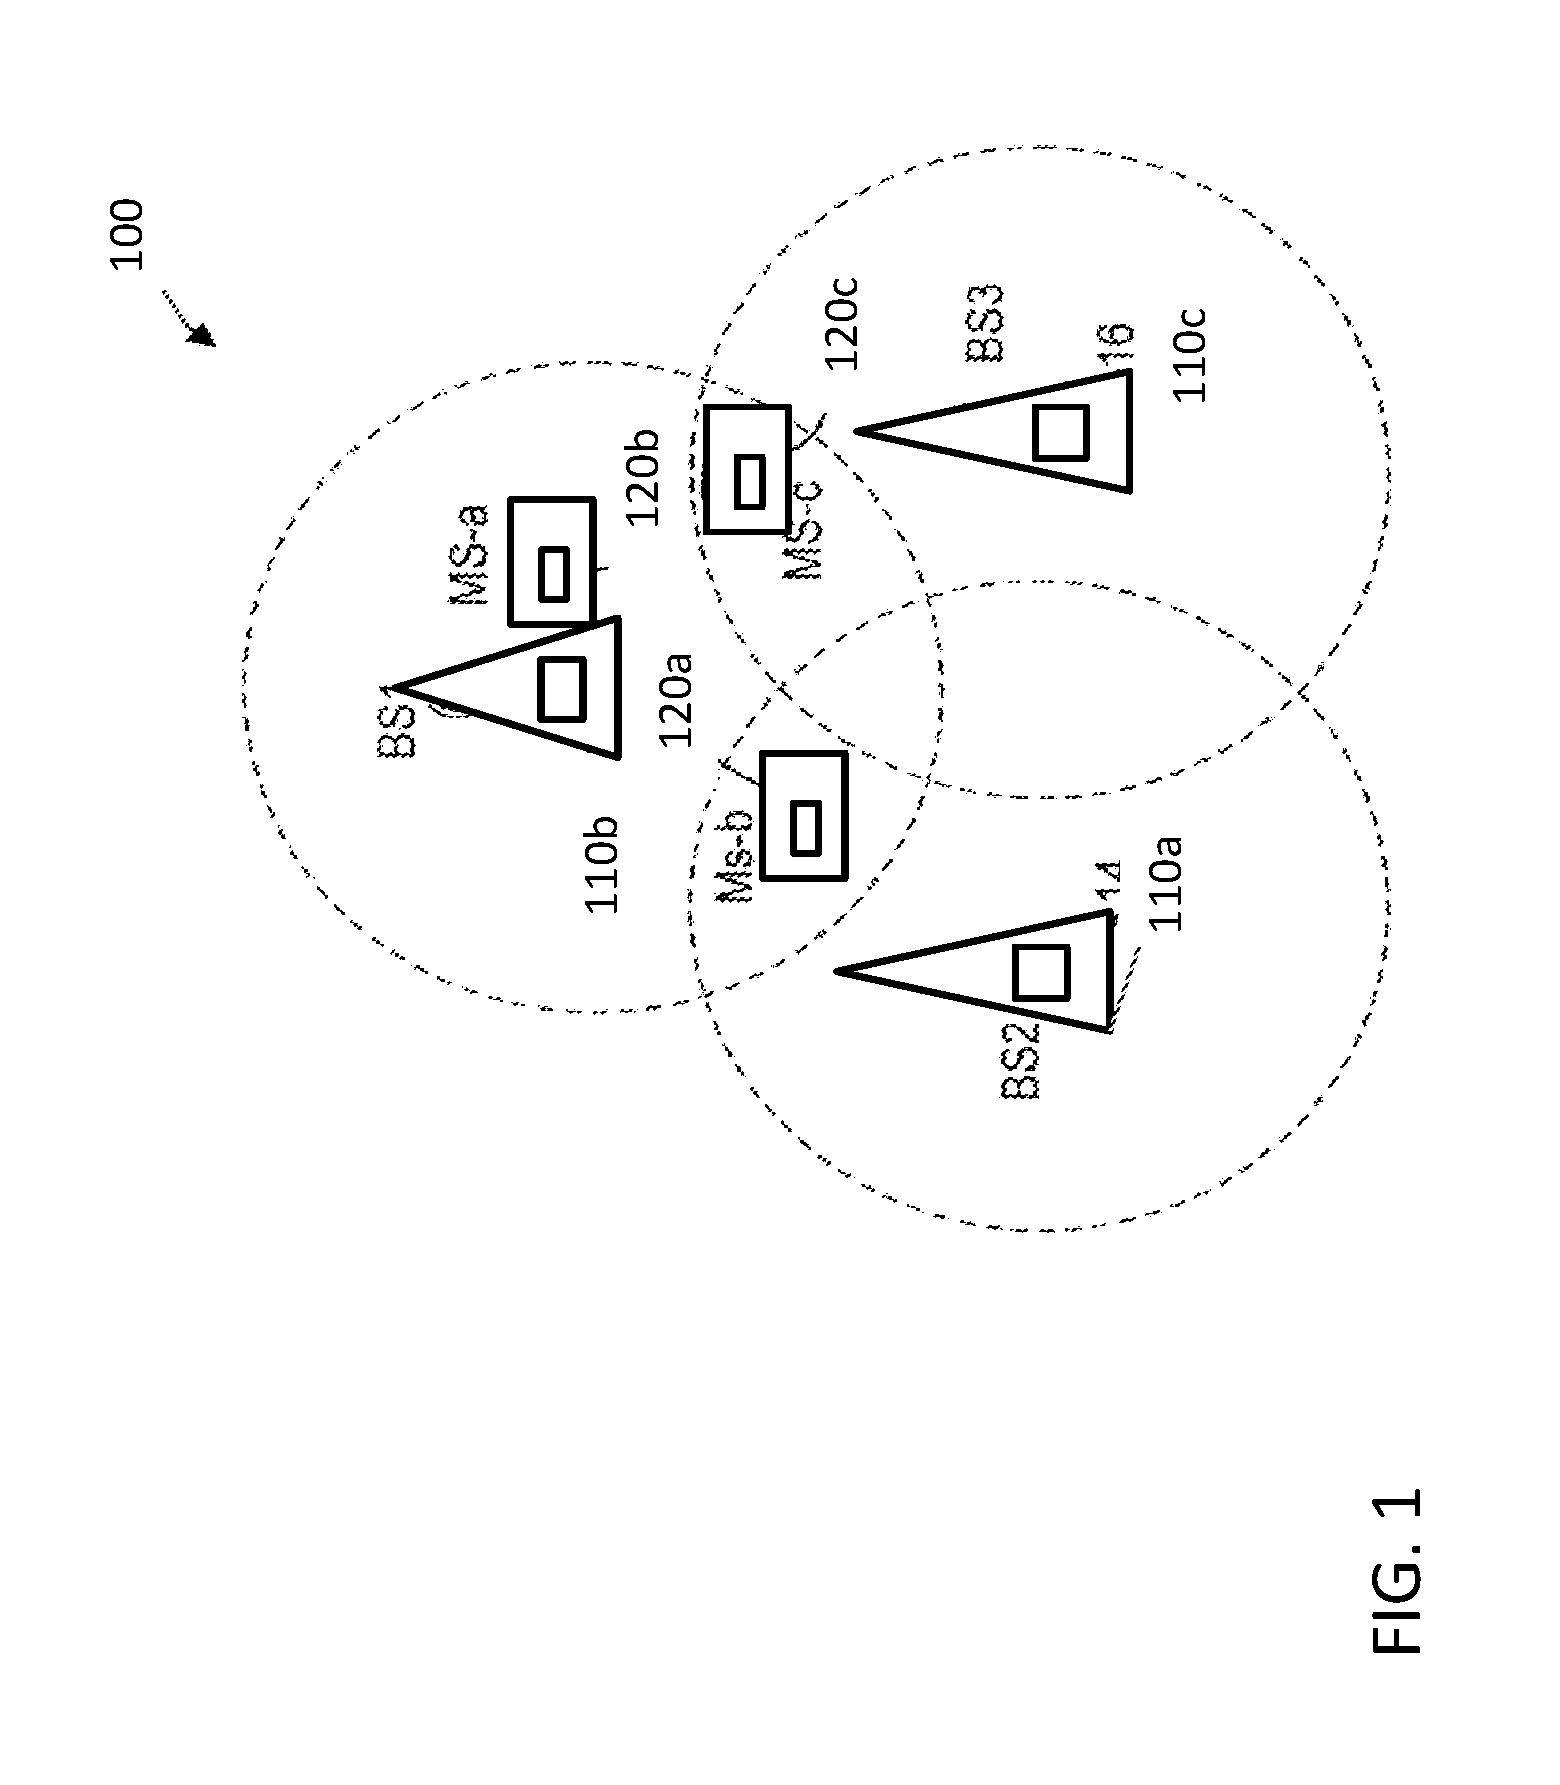 Devices, systems, and methods for IP based broadband wireless communication systems